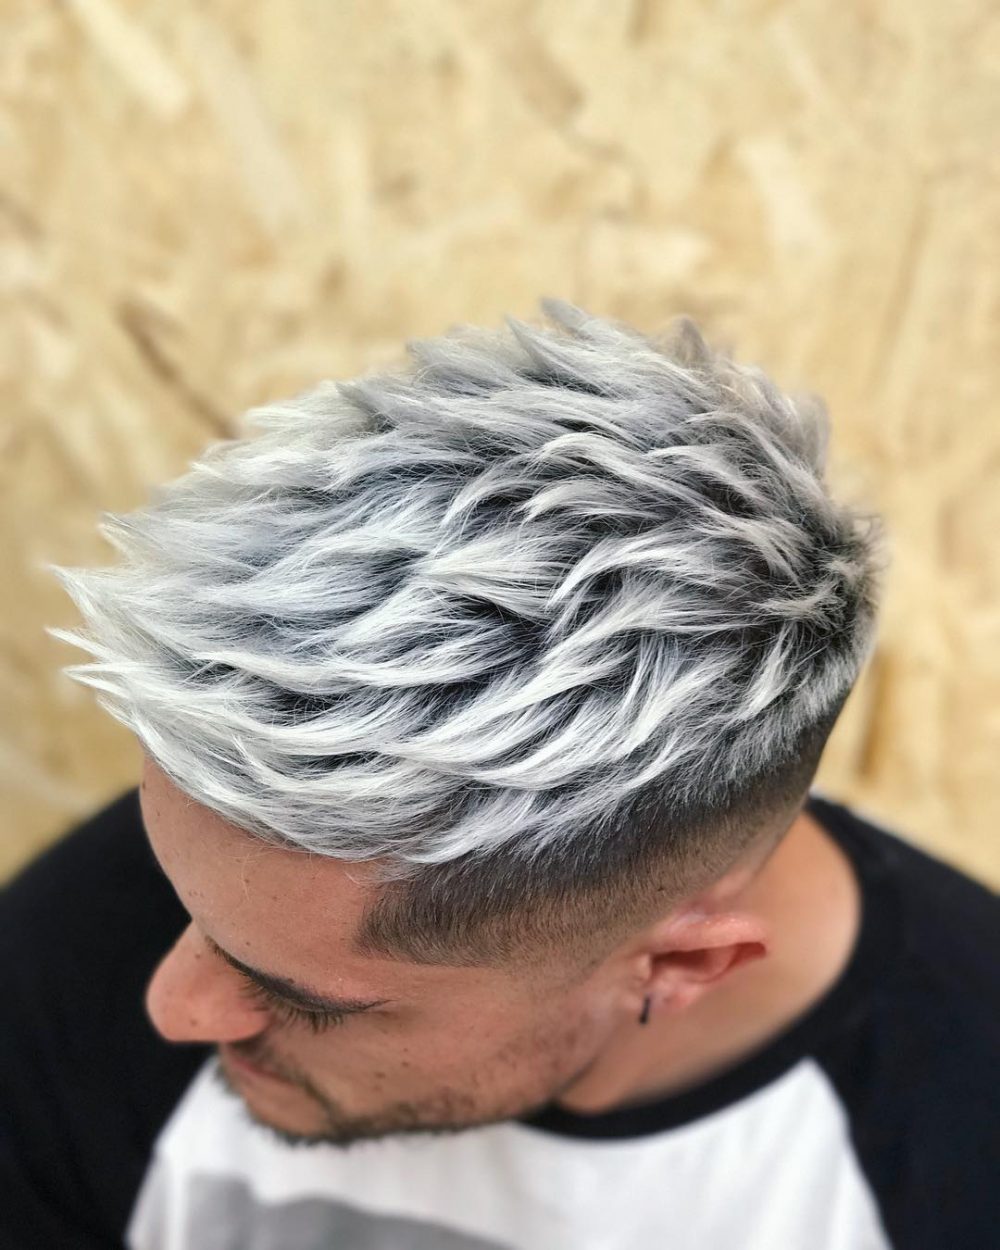 Men's Hairstyle Trends - Do you have gray hair? Check out these essential  gray hair products. http://bit.ly/hairproductsformen #hairproductsformen  #menshairproducts #hairproducts #menshairstyles #hairstylesformen | Facebook